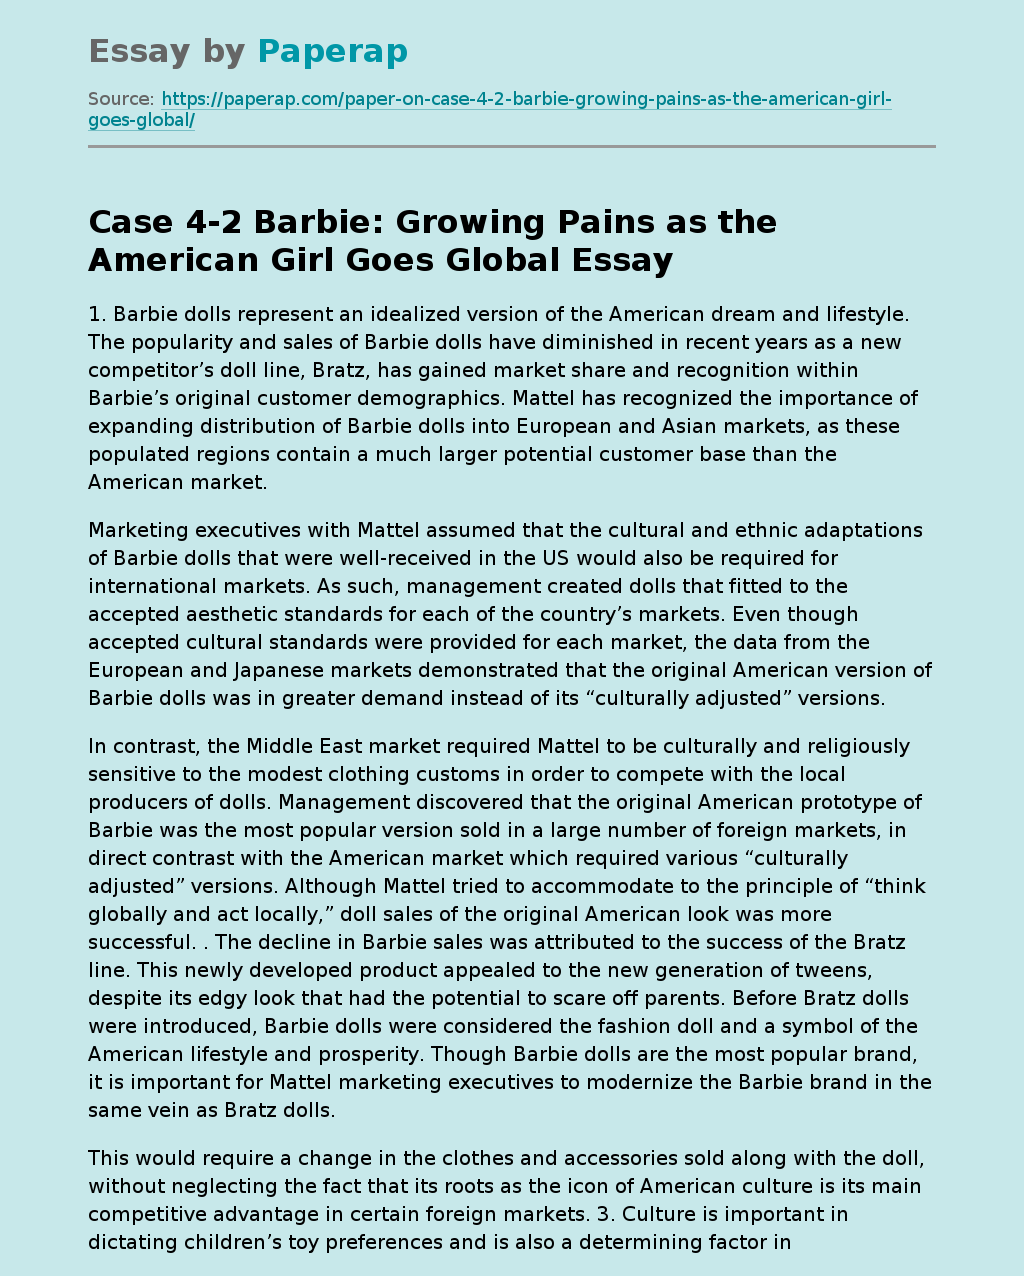 Case 4-2 Barbie: Growing Pains as the American Girl Goes Global